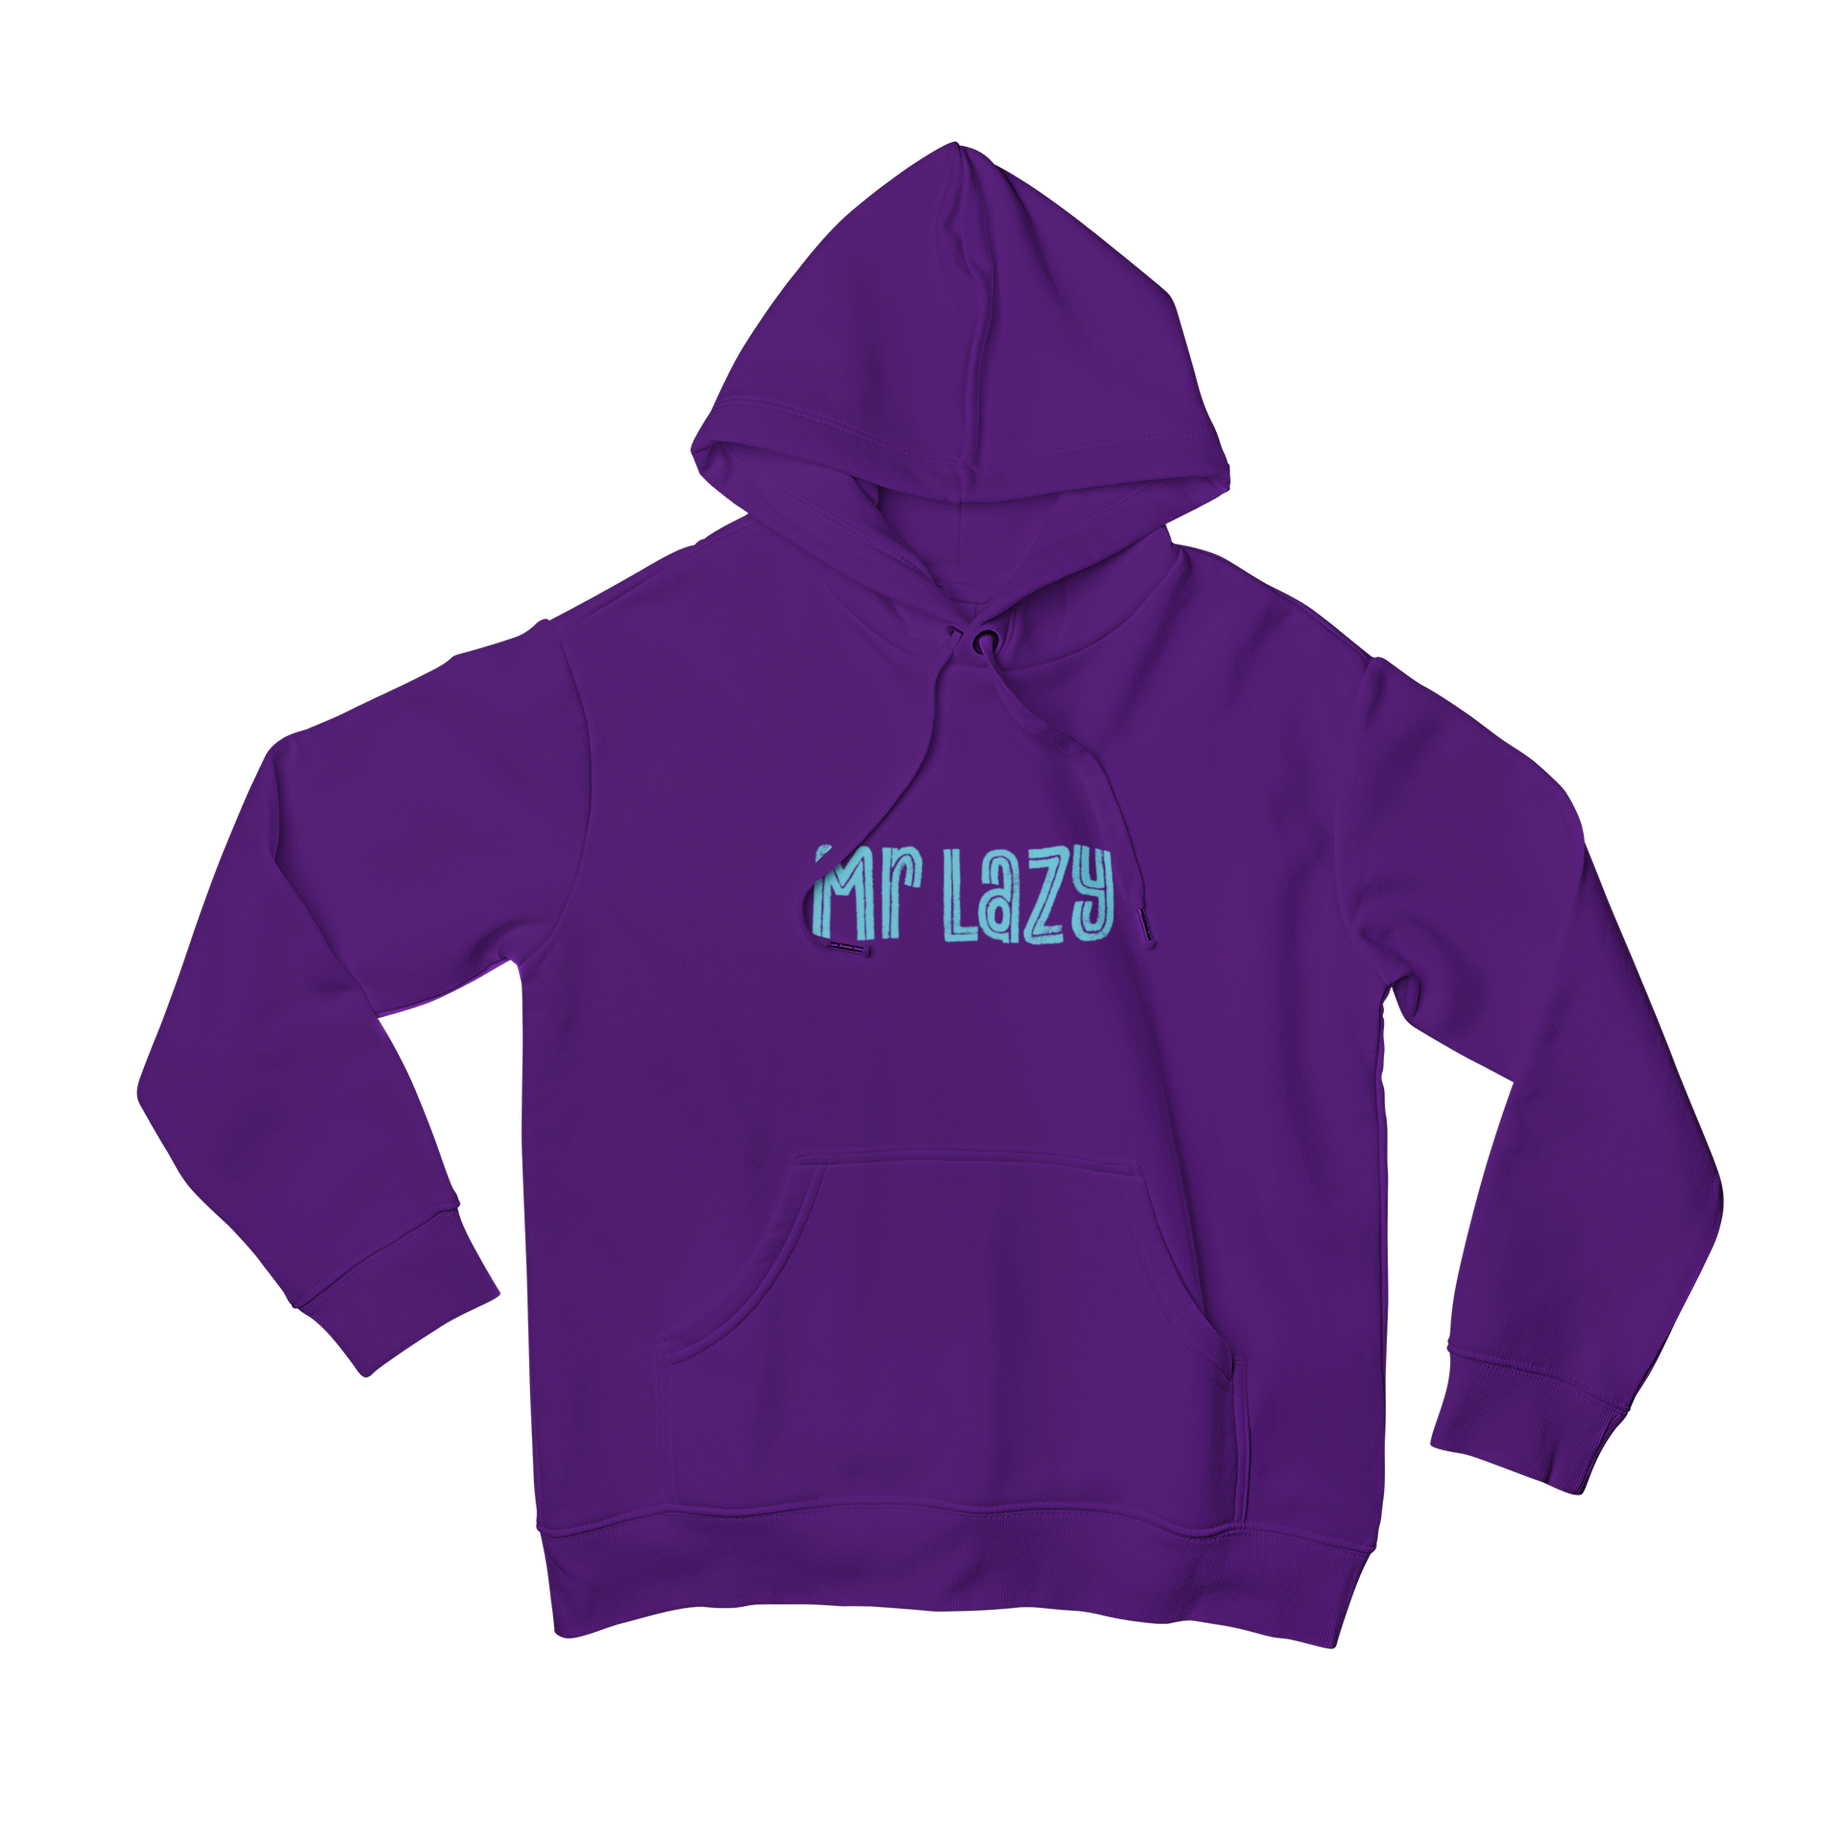 Introducing the Mr Lazy Hoodie, the perfect addition to your wardrobe. Made with a matching slogan to our Miss Crazy Hoodie, this hoodie is sure to make a statement. Stay comfortable and stylish with our Mr Lazy Hoodie.